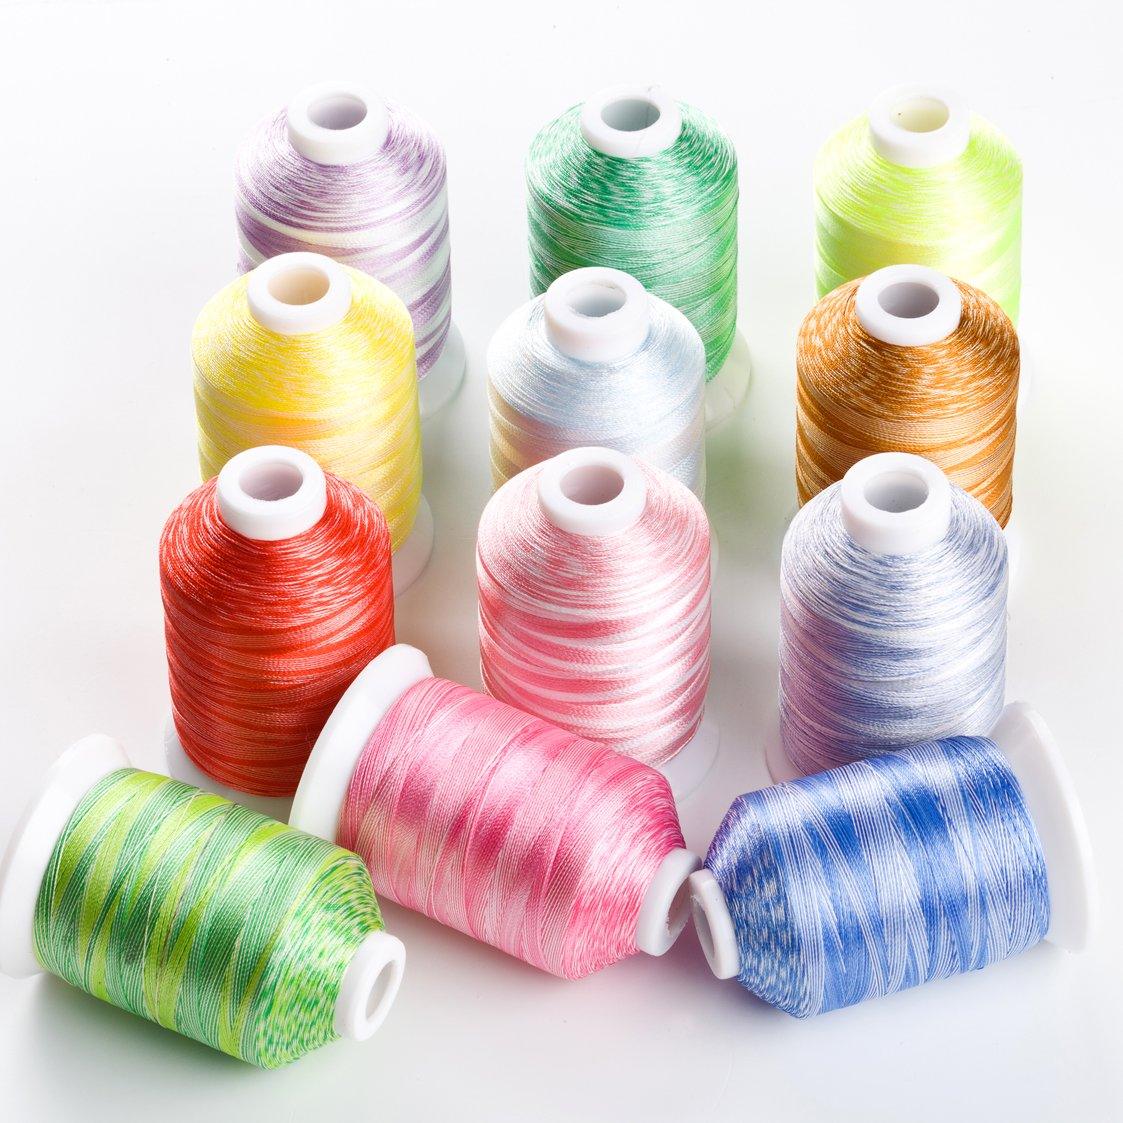 Simthread 12 Variegated Color Embroidery Machine Thread 1100Y Spool —  Simthread - High Quality Machine Embroidery Thread Supplier